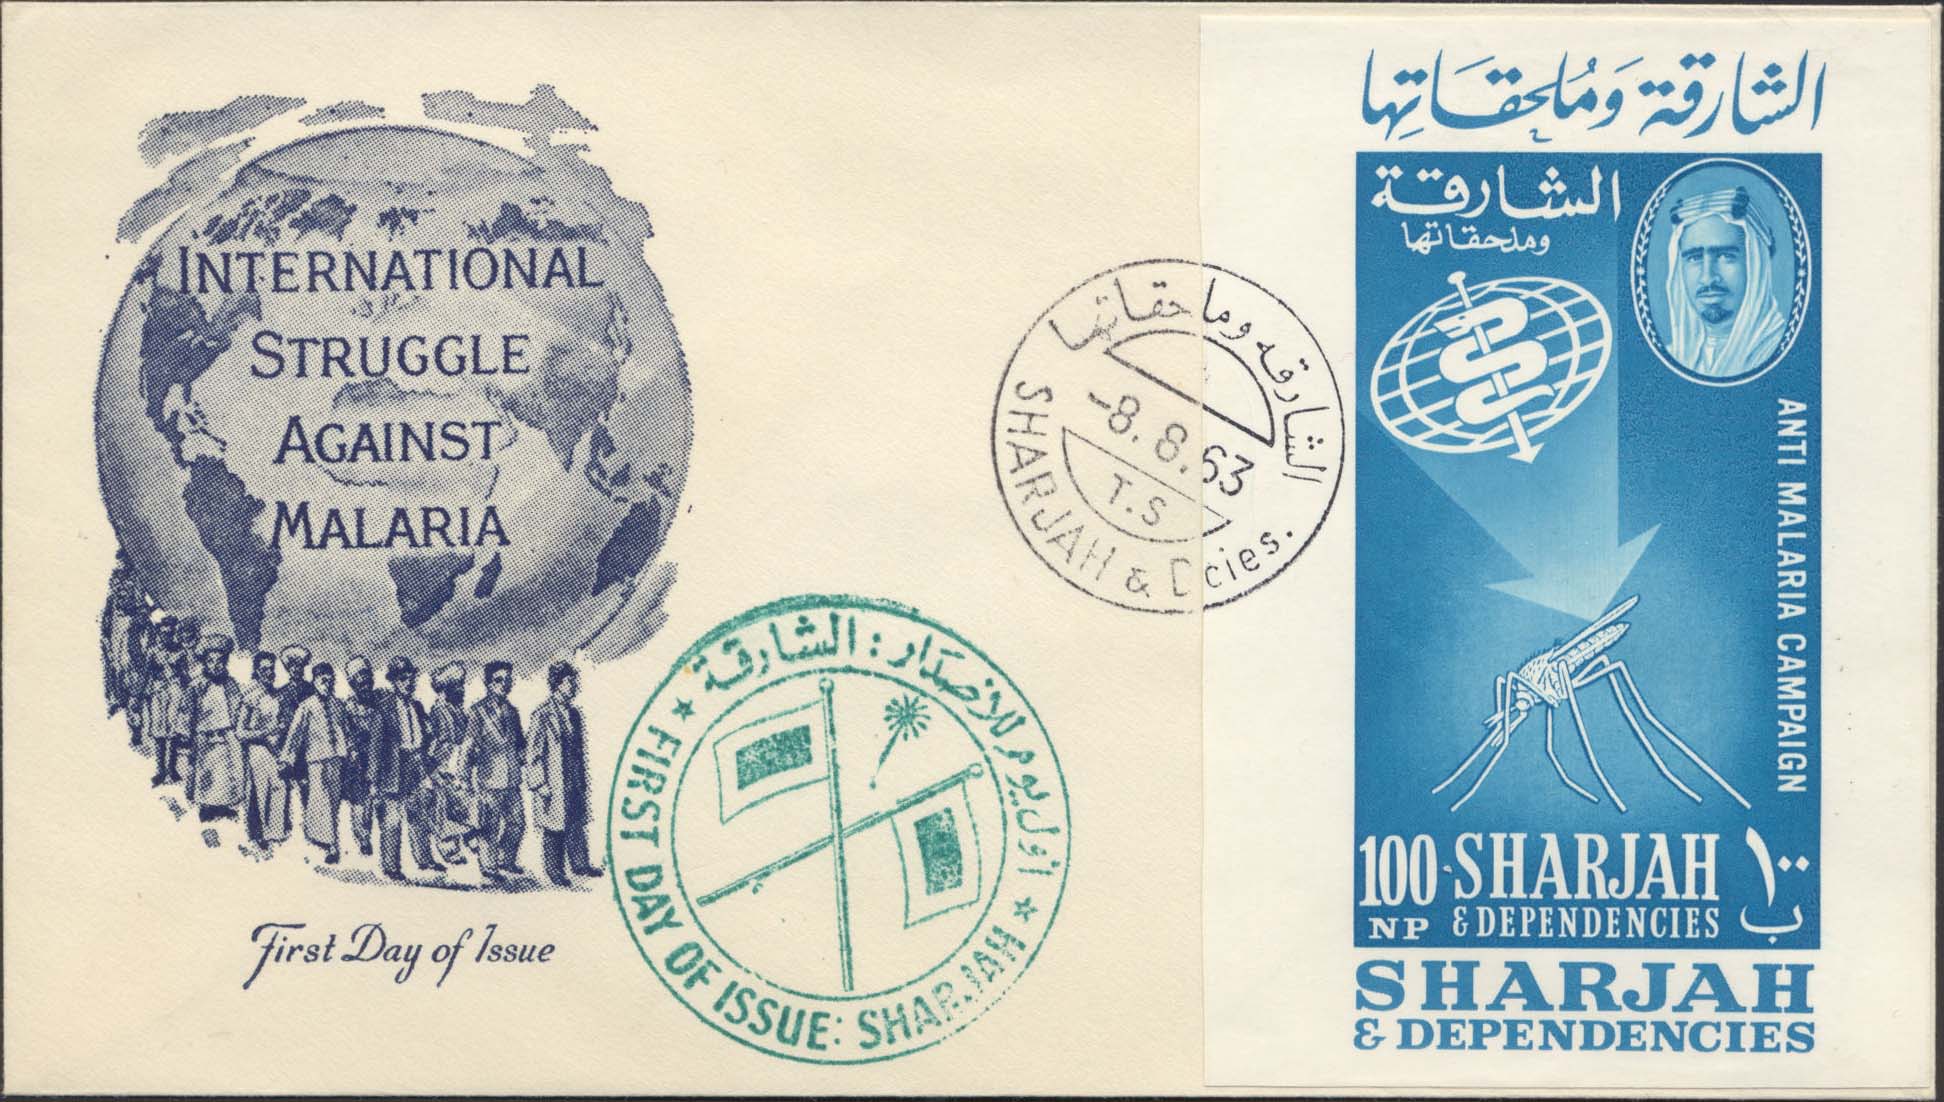 Sharjah And Dependencies Scott 21A (FDC w/ Counterfeit Artmaster Cachet (Blue))<br /><br />Extra Green FD Cancellation